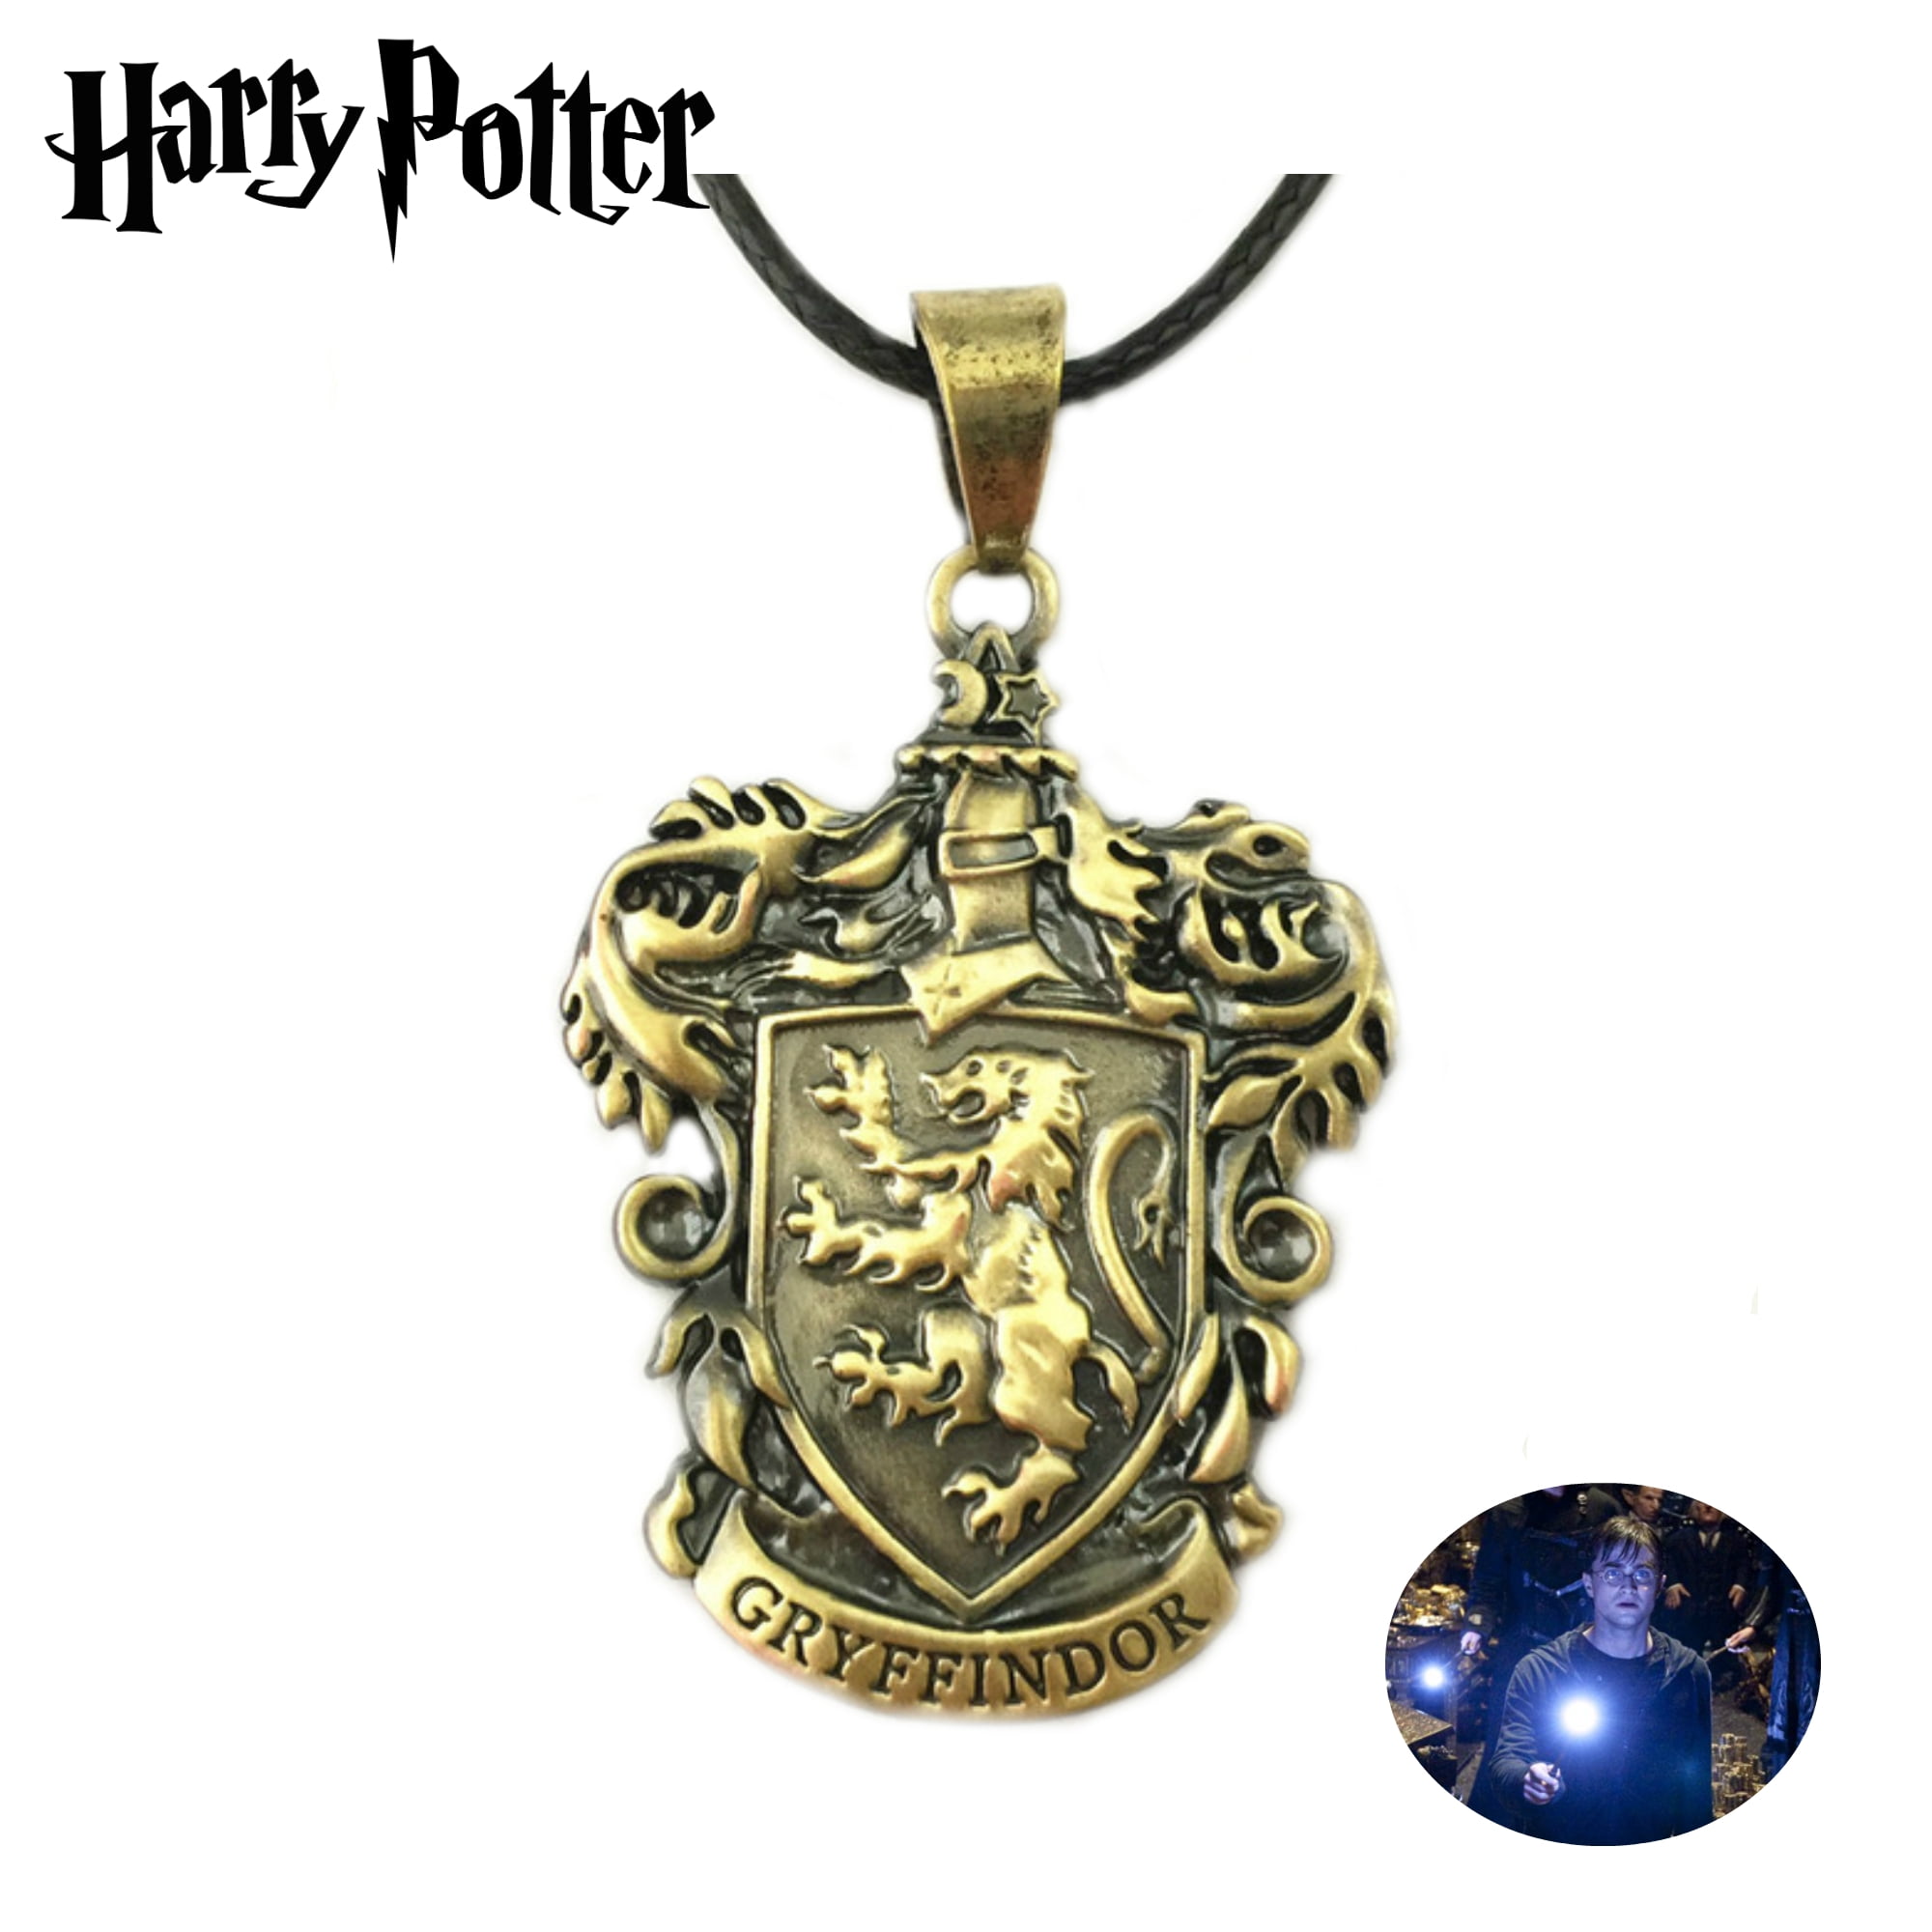 Bronze Plated Harry Potter Deathly Hallows Chain Necklace 18" Fancy Dress Wizard 